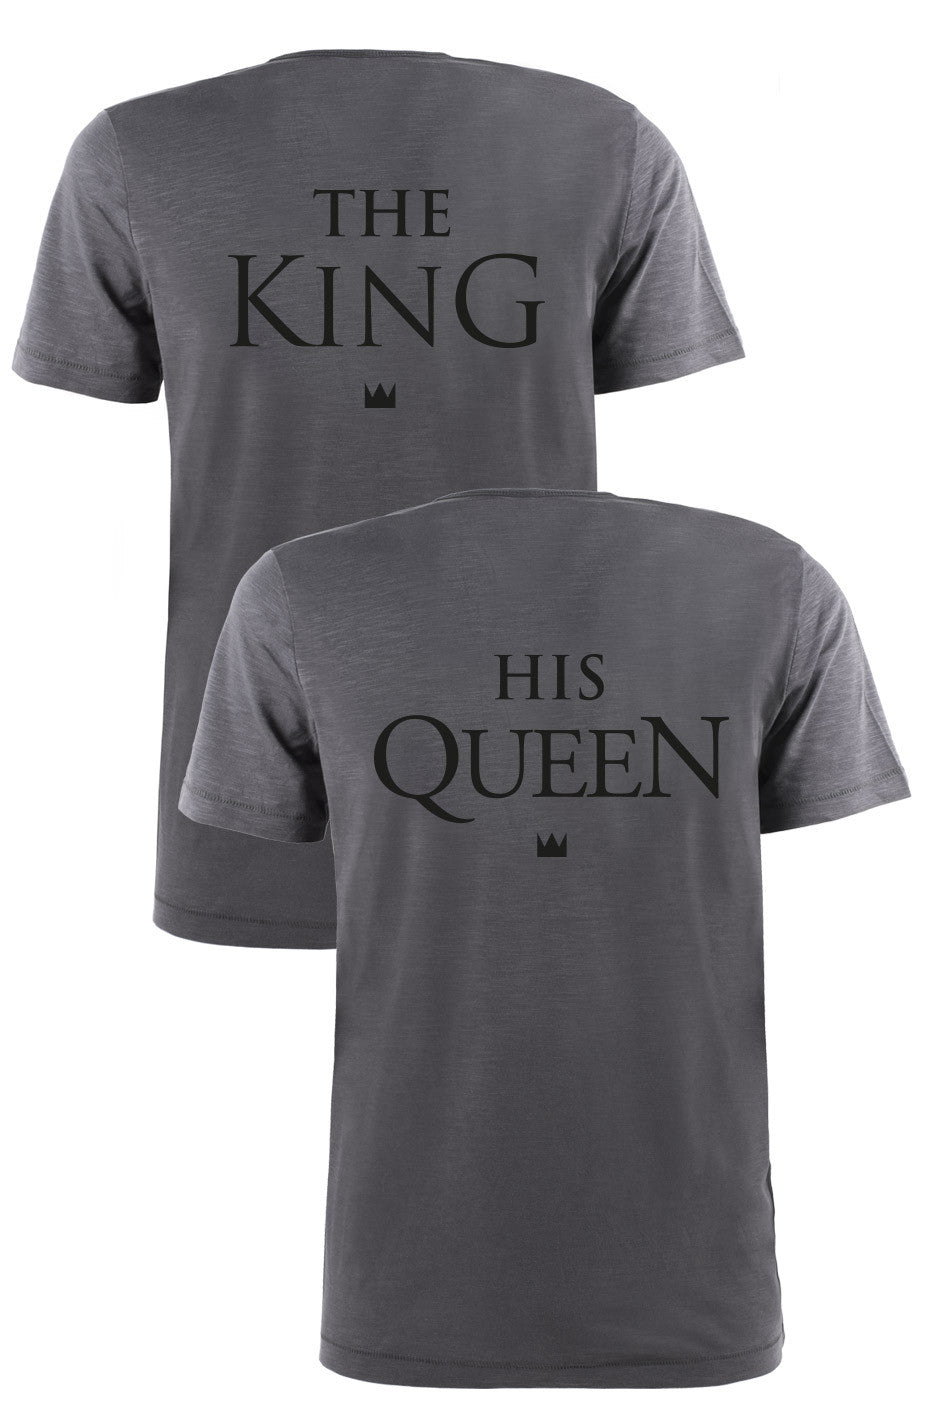 THE KING AND HIS QUEEN T-SHIRT – Nohow Style